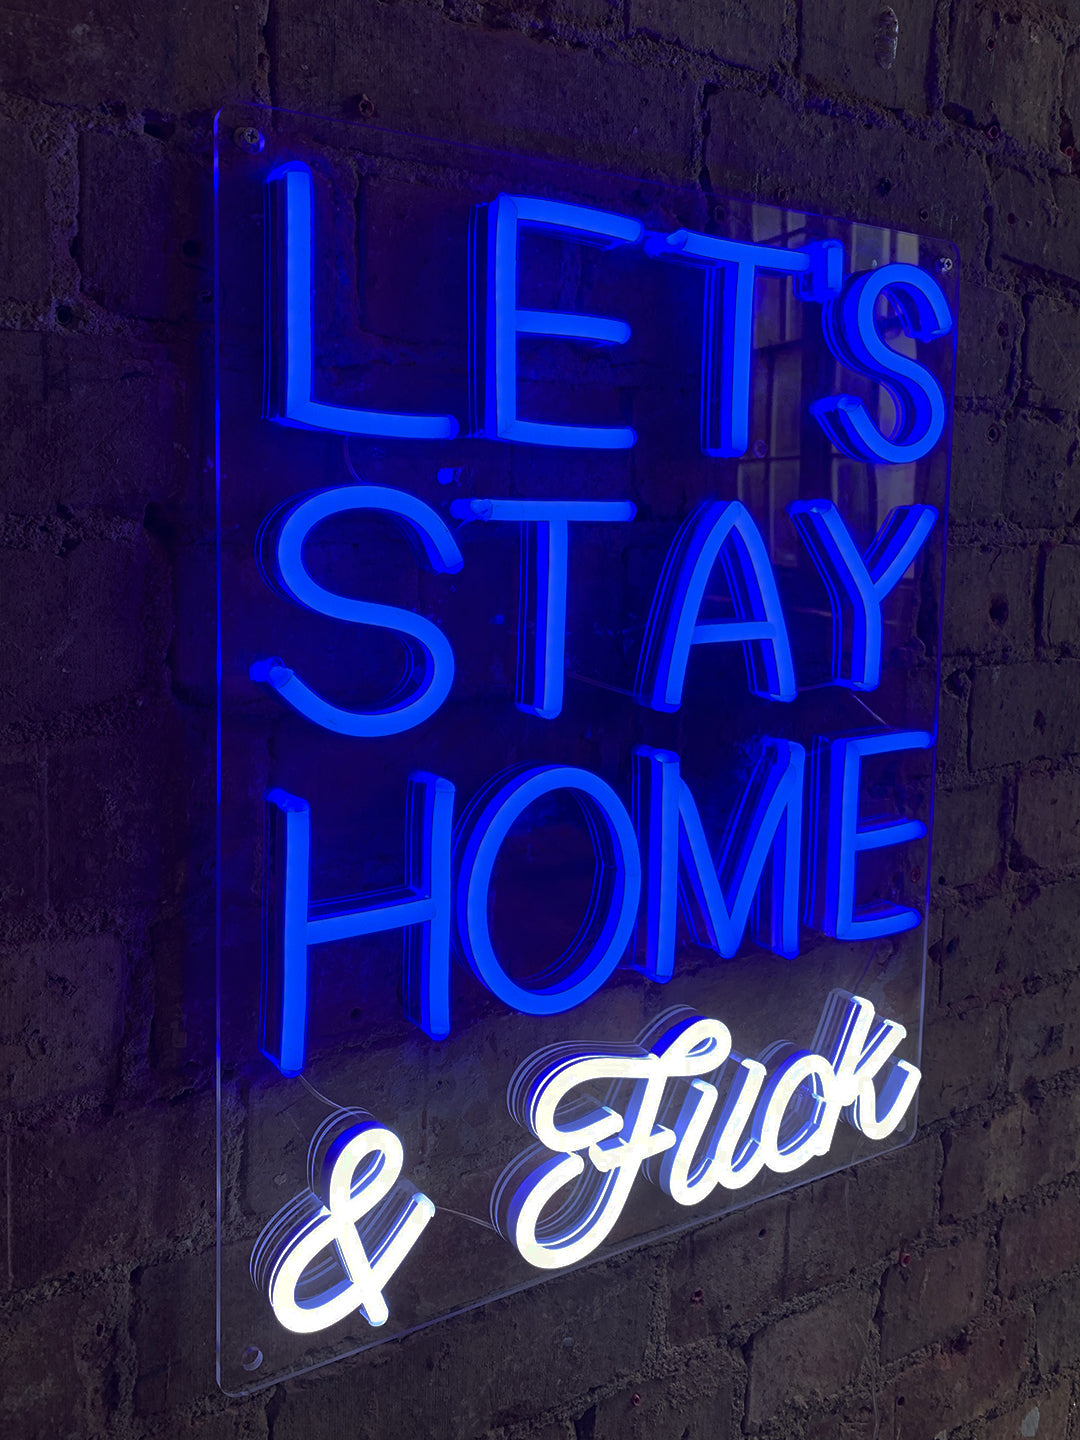 Lets Stay Home &amp; F*ck' Blaue LED-Wandhalterung Neon